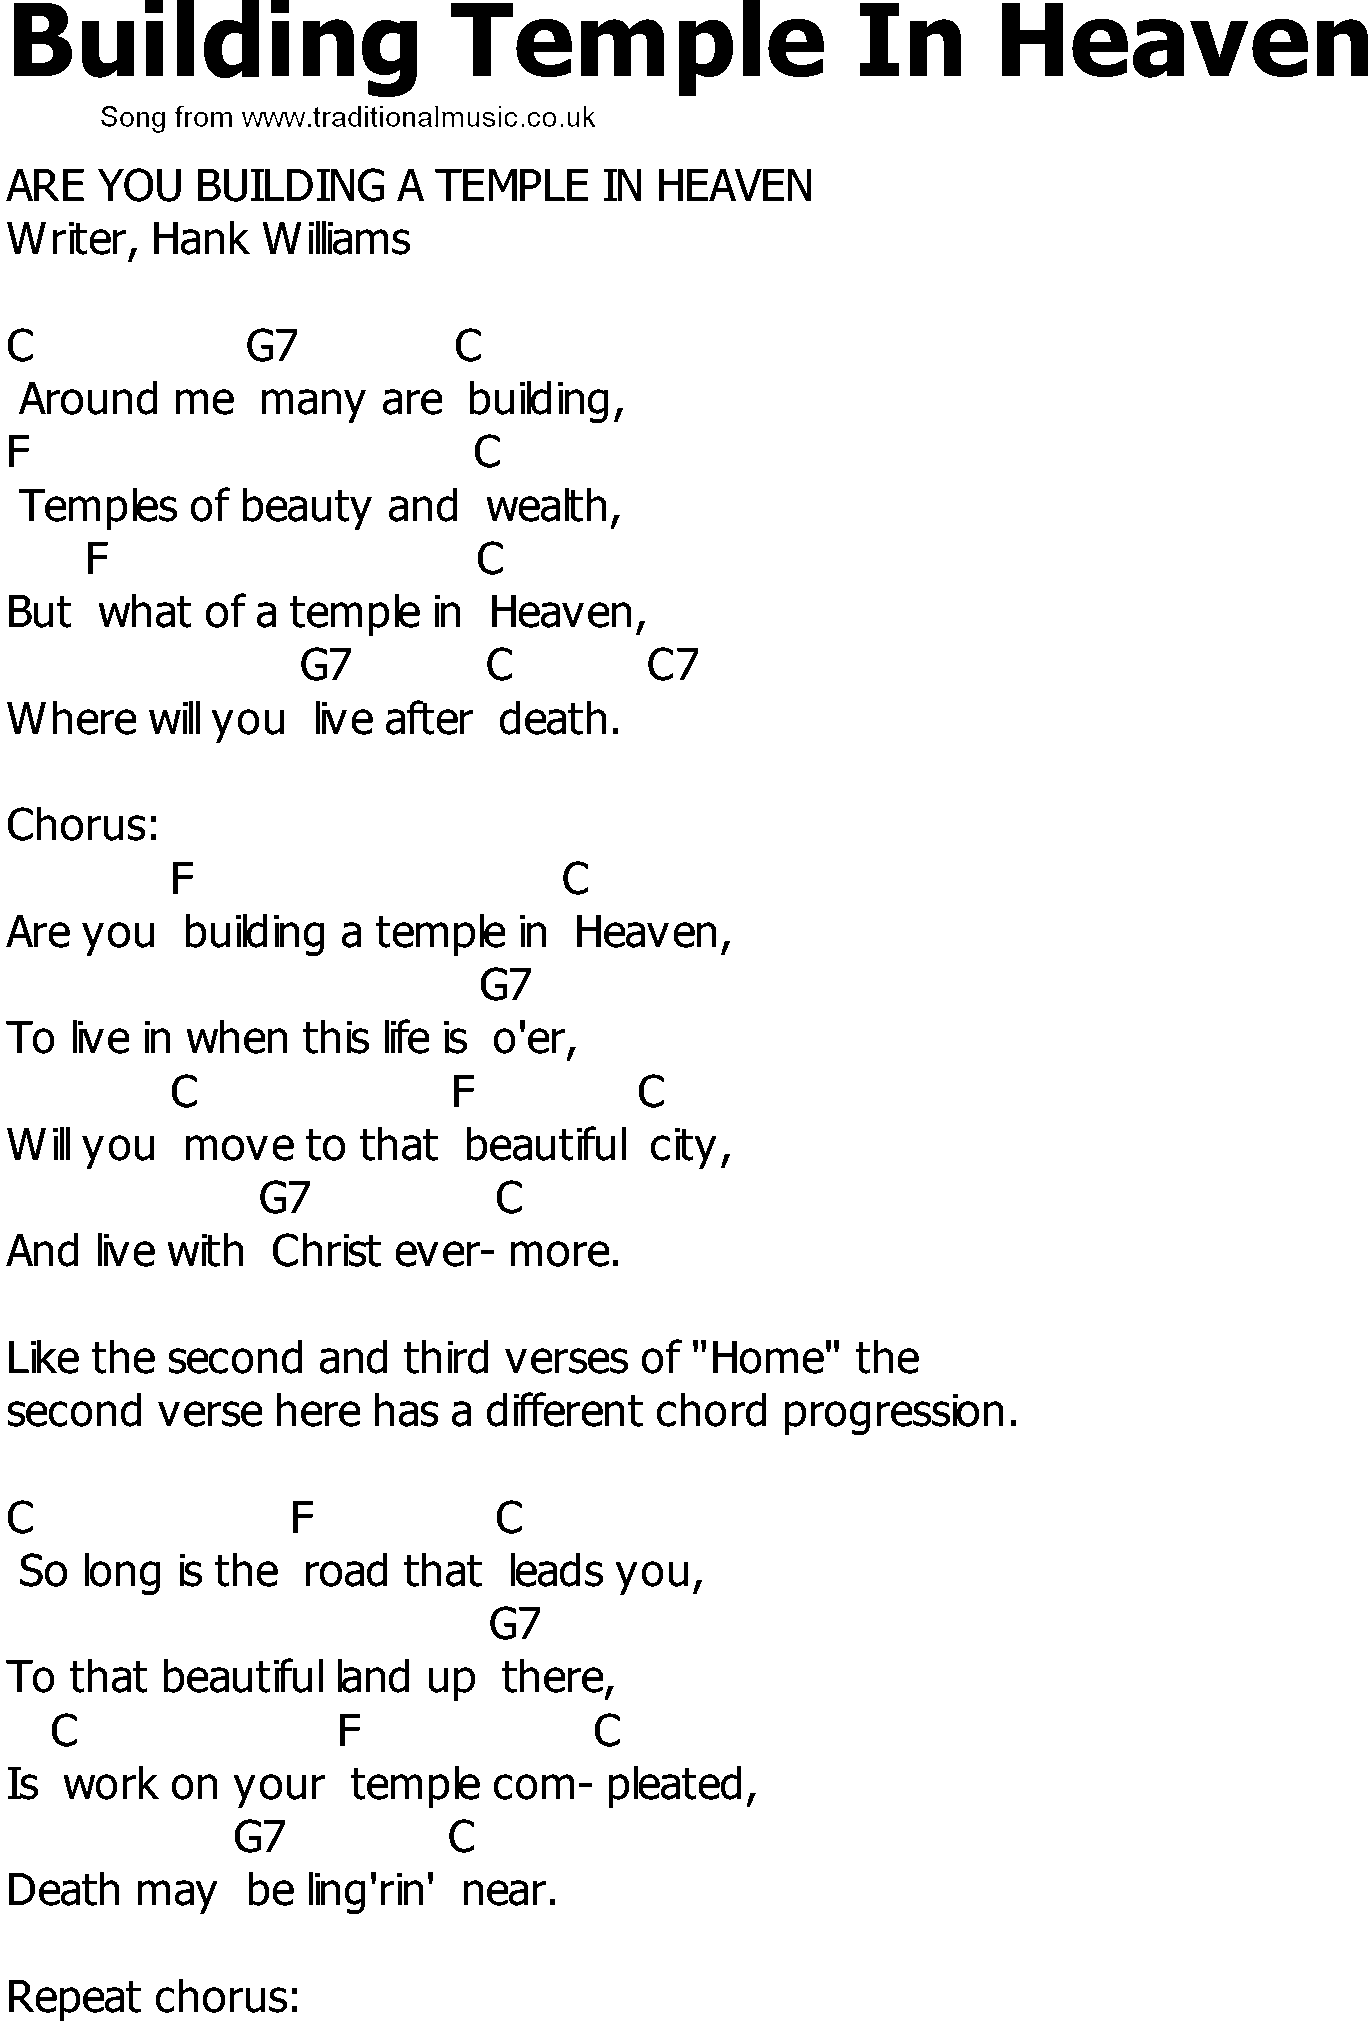 Old Country song lyrics with chords - Building Temple In Heaven